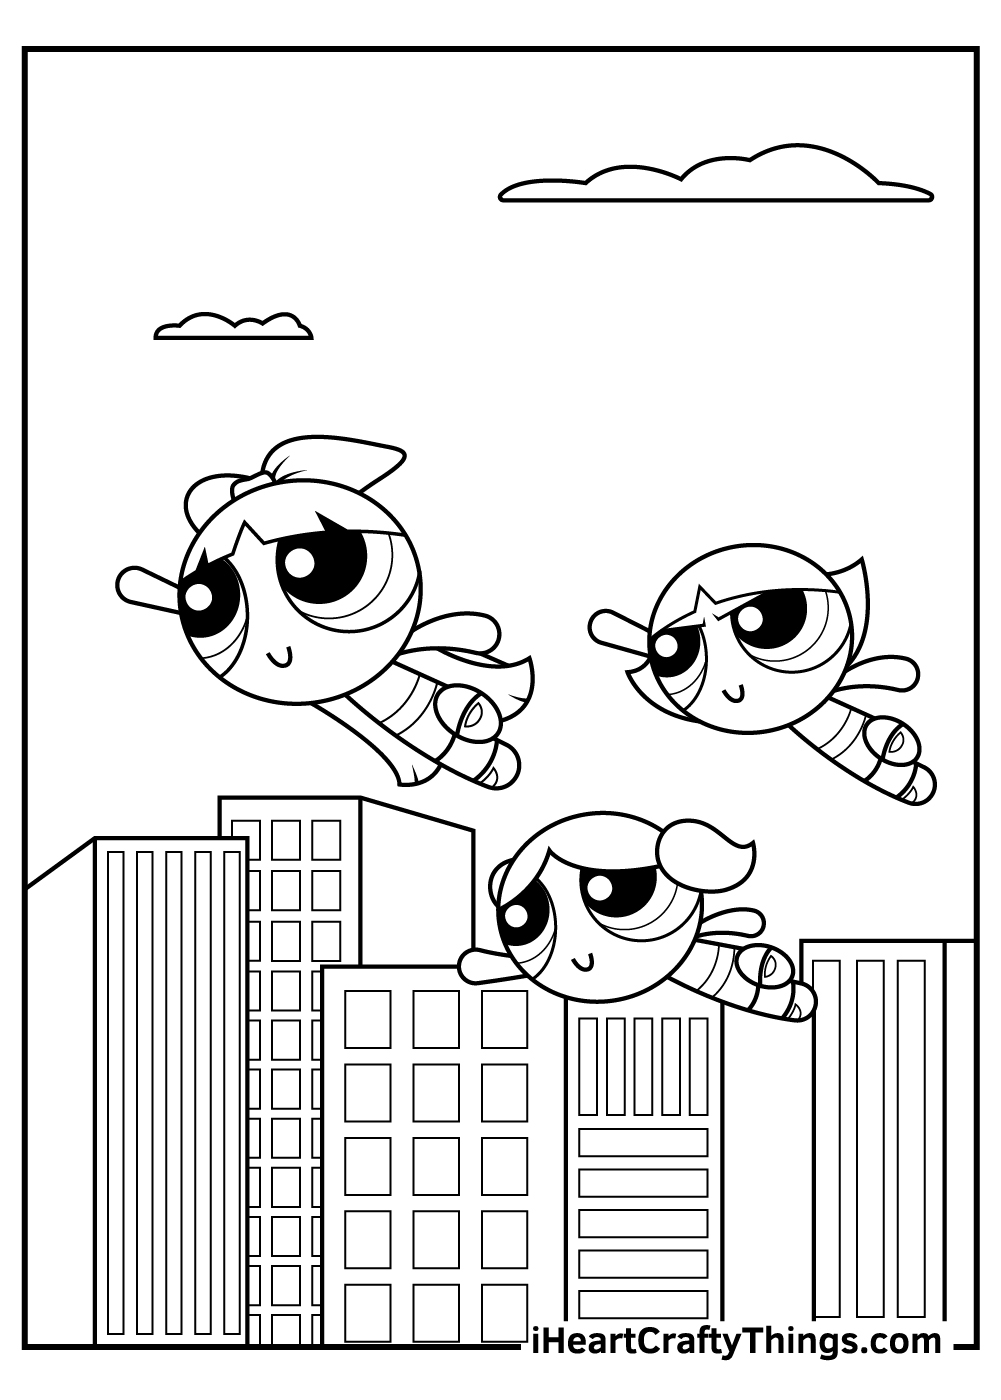 free powerpuff girls coloring sheets to print out